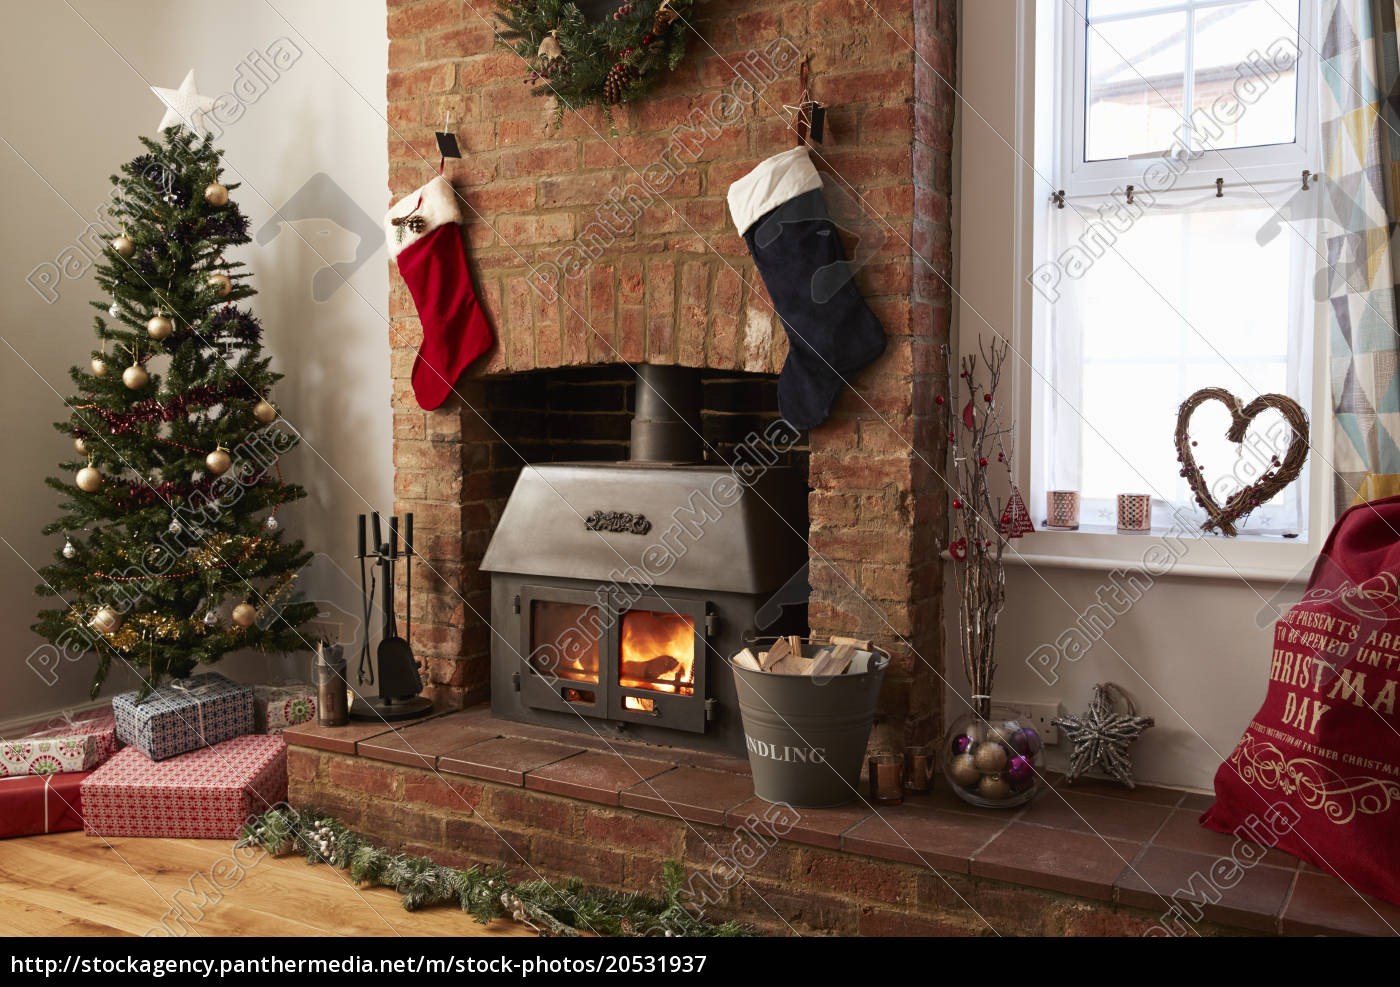 Royalty Free Image 20531937 Interior View Of Lounge Decorated For Christmas